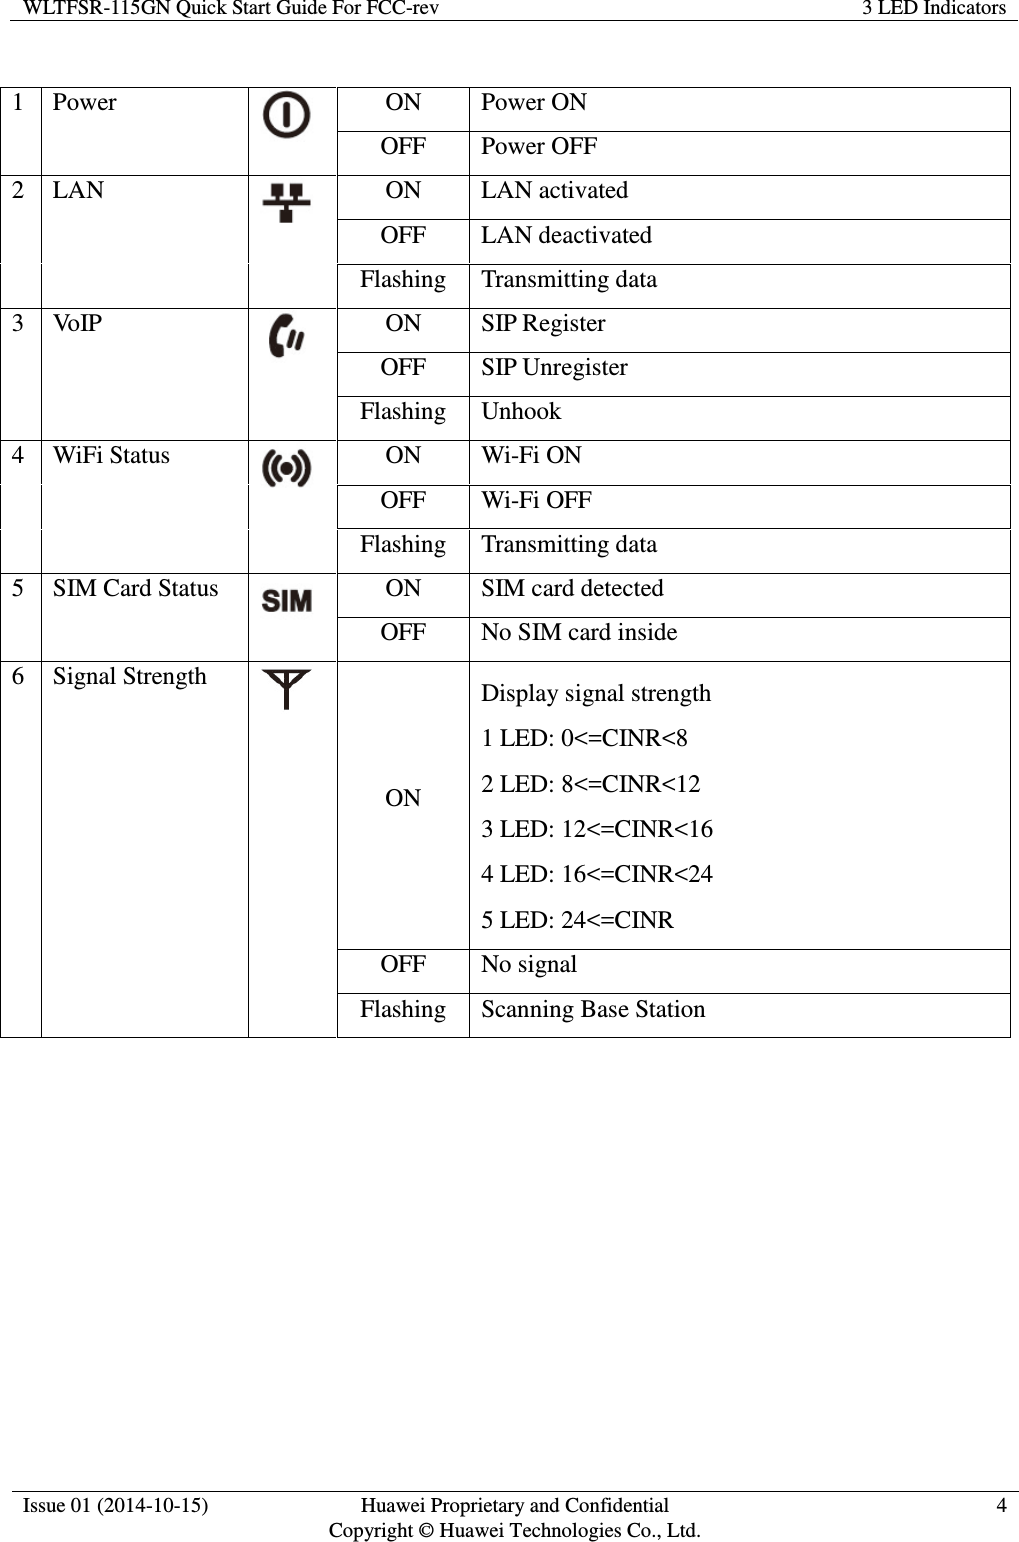 WLTFSR-115GN Quick Start Guide For FCC-rev 3 LED Indicators   1 Power  ON Power ON OFF Power OFF 2 LAN  ON LAN activated OFF LAN deactivated Flashing Transmitting data 3 VoIP  ON SIP Register OFF SIP Unregister Flashing Unhook 4 WiFi Status  ON Wi-Fi ON OFF Wi-Fi OFF Flashing Transmitting data 5 SIM Card Status  ON SIM card detected OFF No SIM card inside 6 Signal Strength  ON Display signal strength 1 LED: 0&lt;=CINR&lt;8 2 LED: 8&lt;=CINR&lt;12 3 LED: 12&lt;=CINR&lt;16 4 LED: 16&lt;=CINR&lt;24 5 LED: 24&lt;=CINR OFF No signal Flashing Scanning Base Station  Issue 01 (2014-10-15)  Huawei Proprietary and Confidential                   Copyright © Huawei Technologies Co., Ltd. 4  